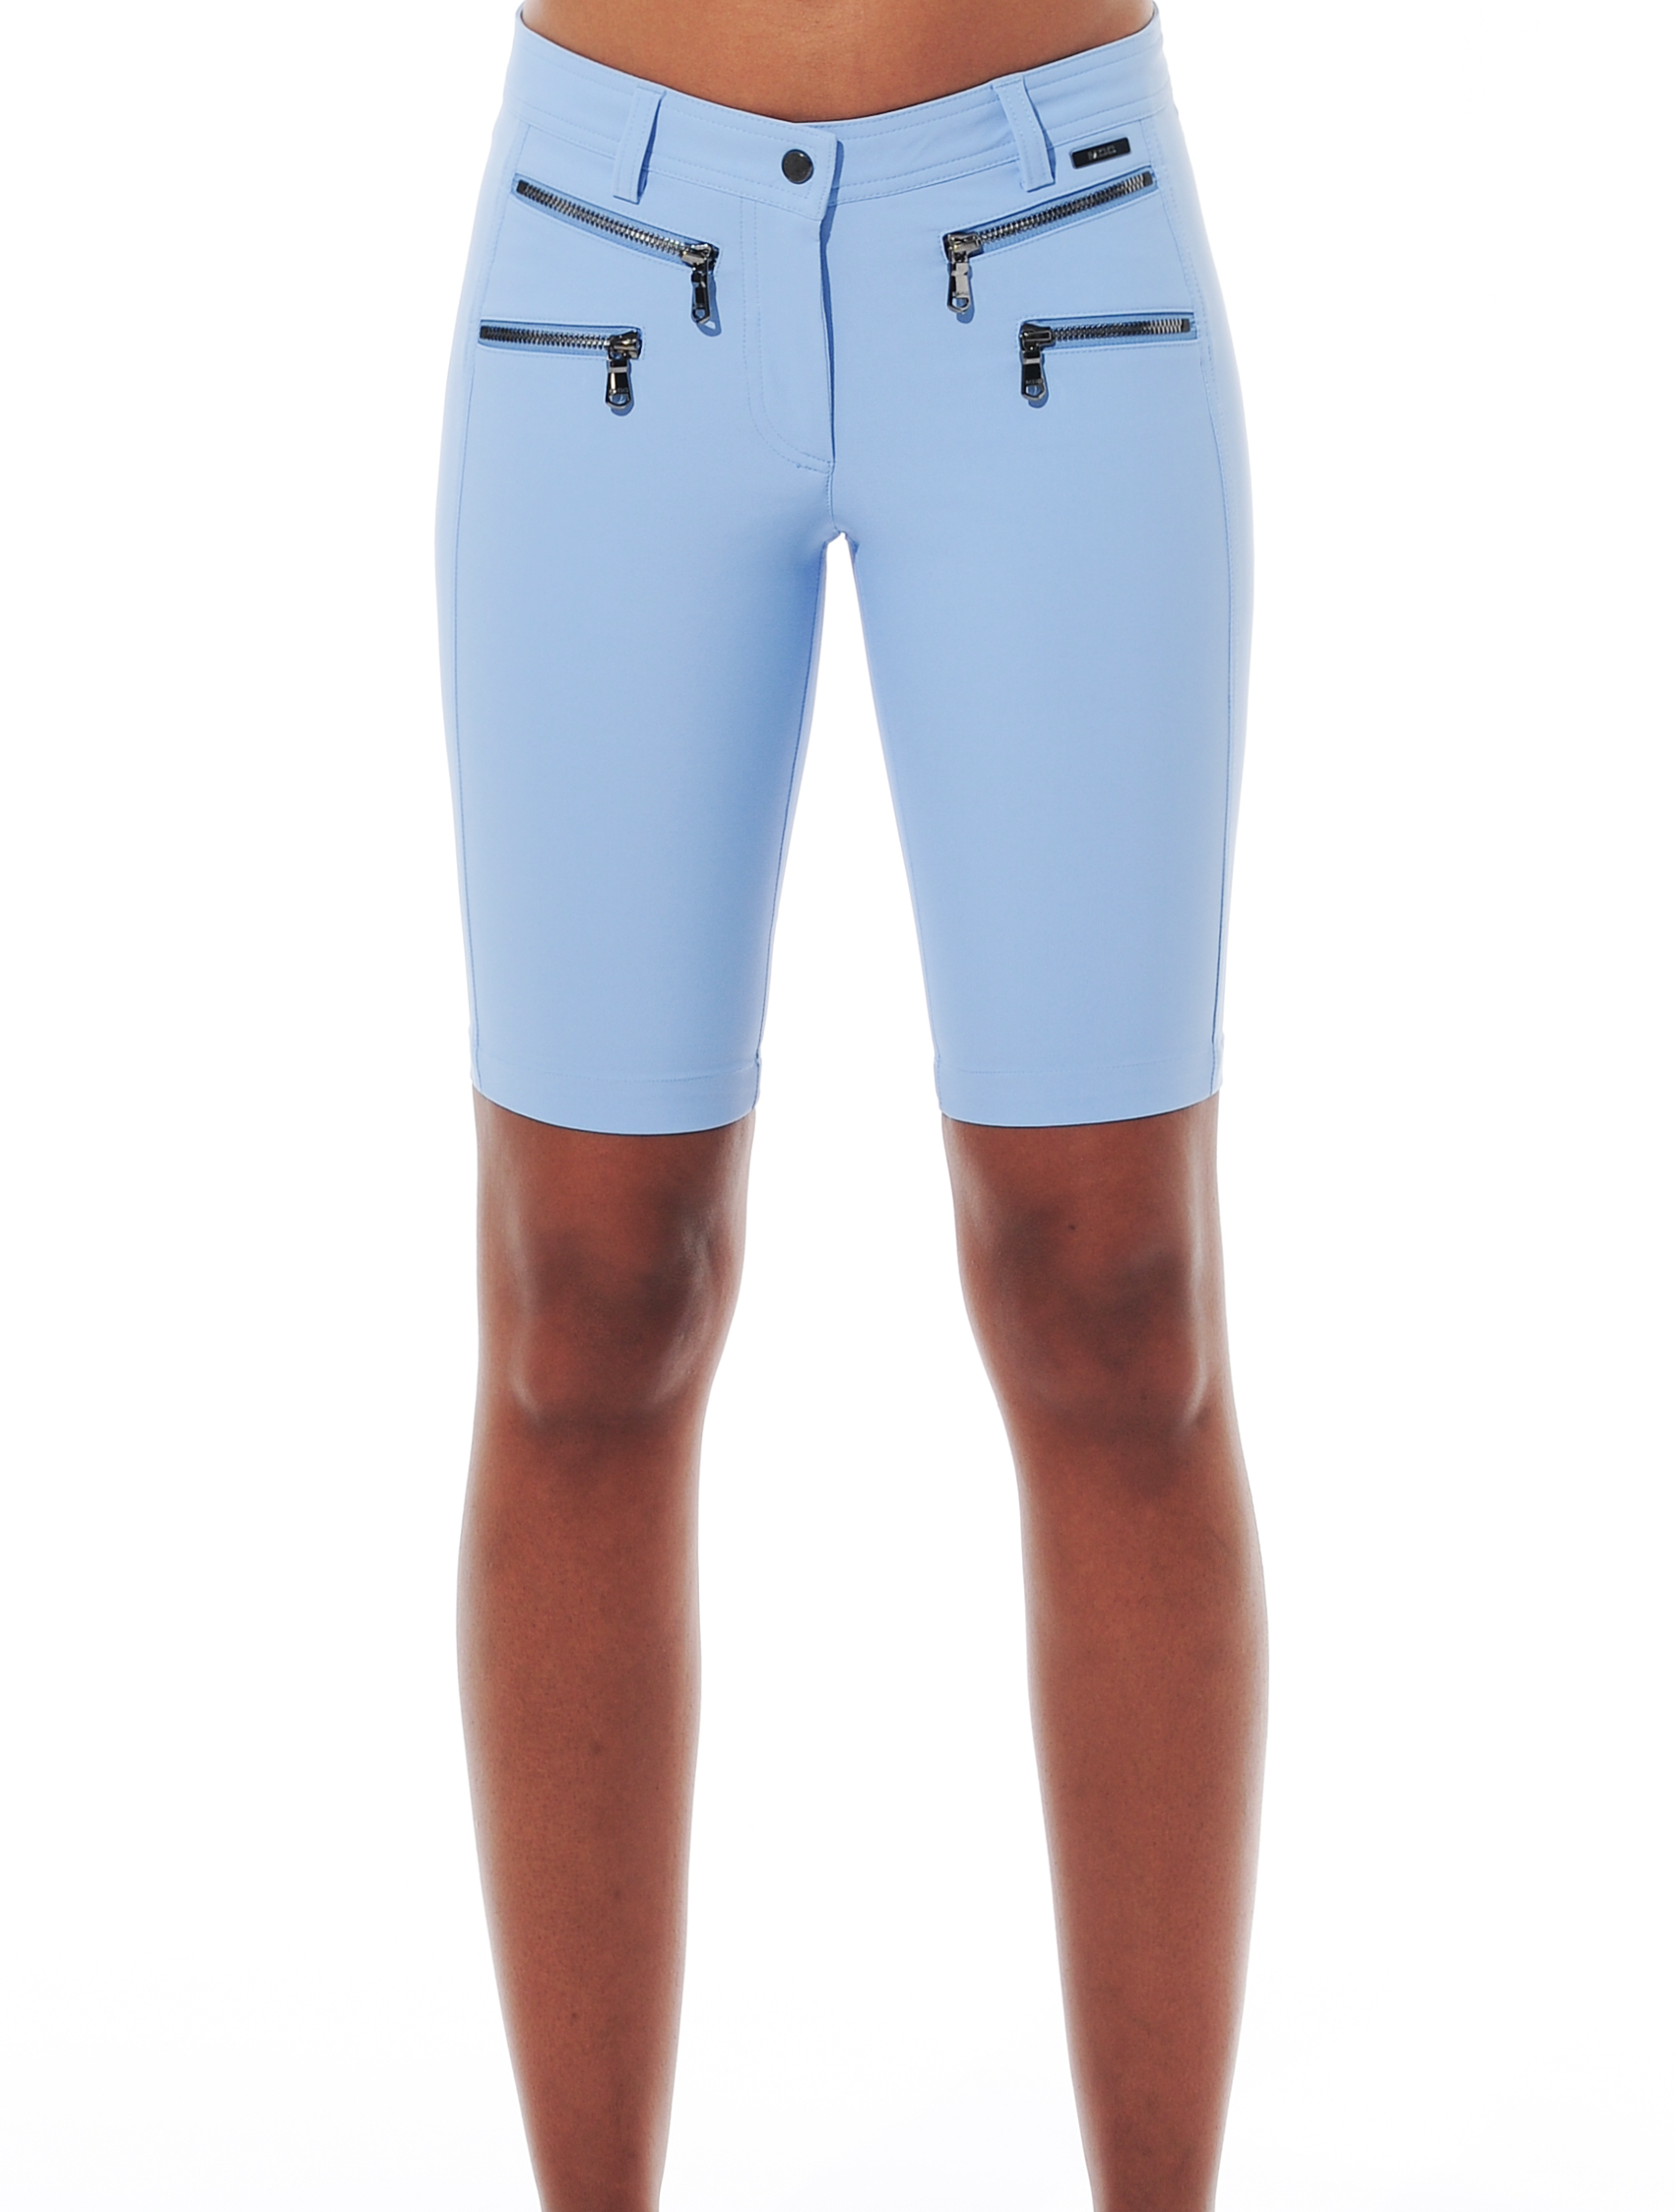 4way stretch double zip shorts baby blue 